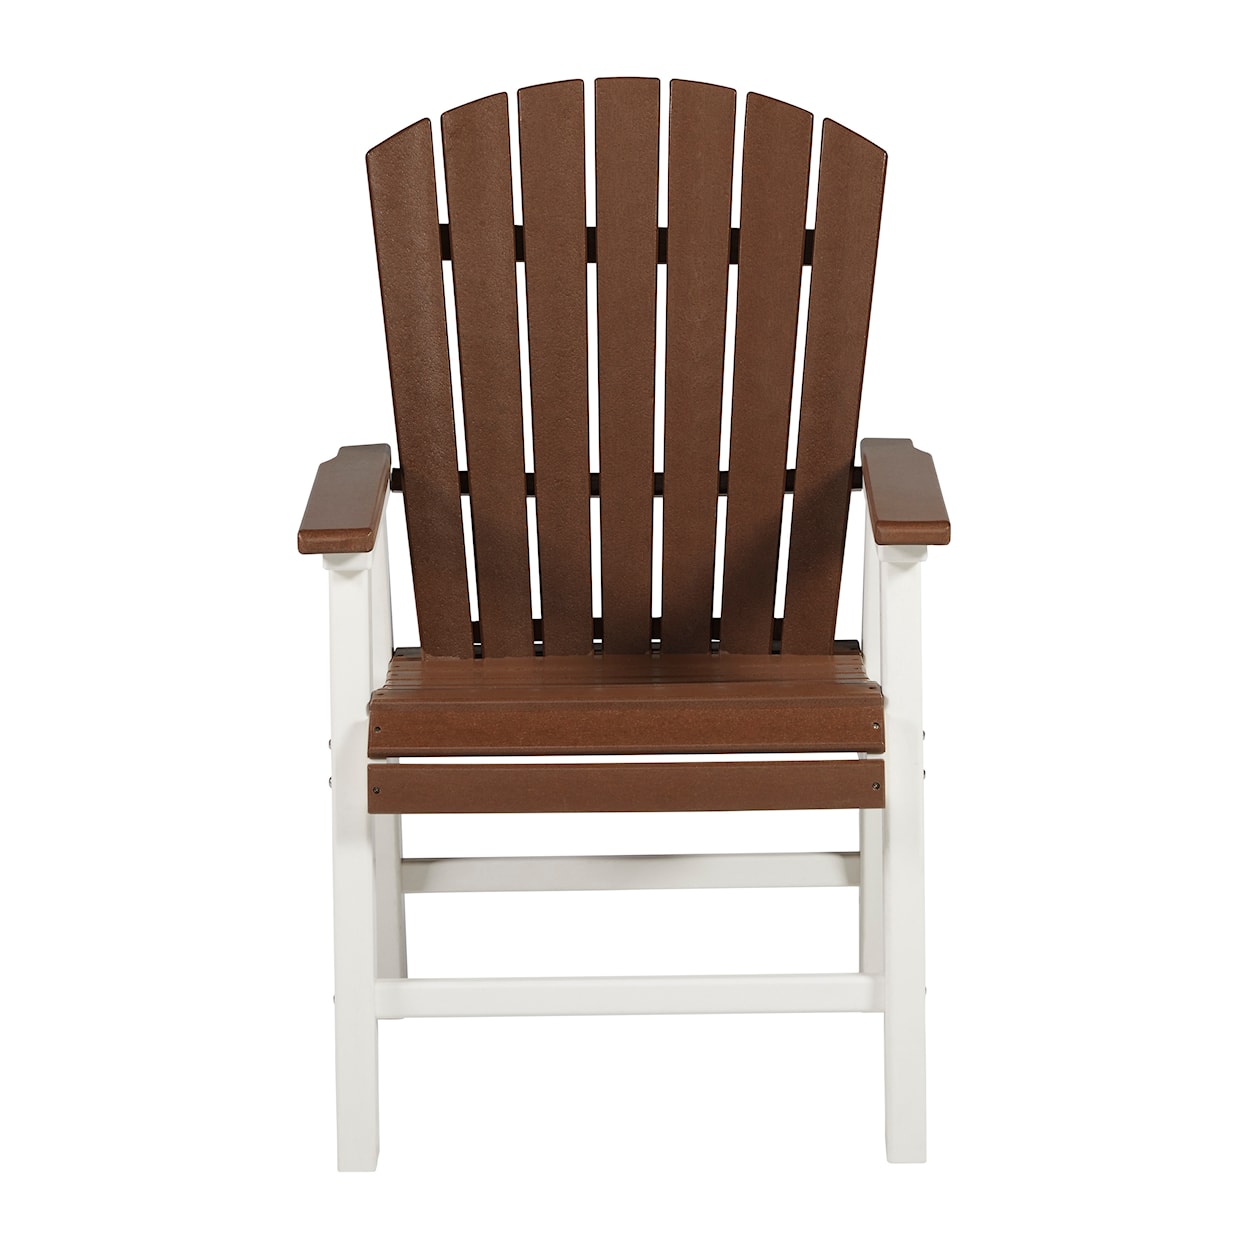 Benchcraft Genesis Bay Outdoor Dining Arm Chair (Set of 2)